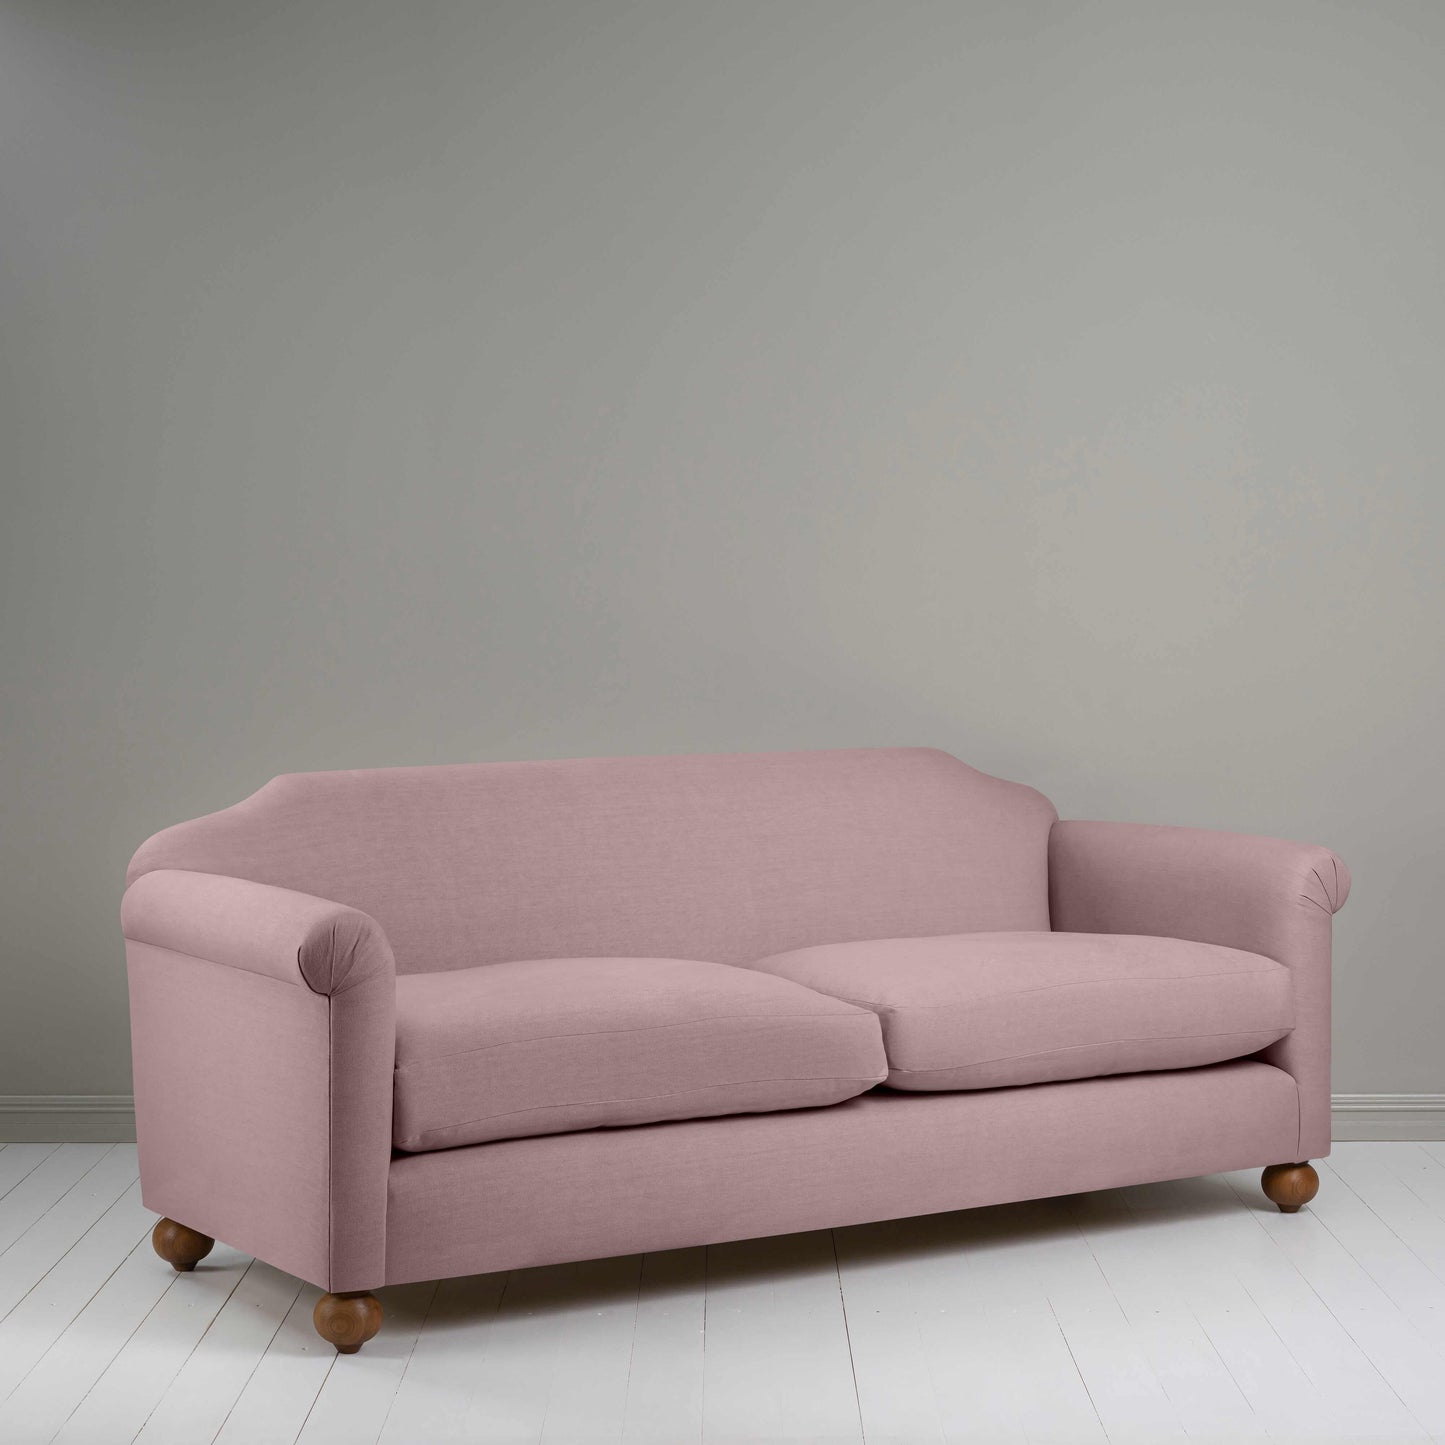 Dolittle 4 seater Sofa in Laidback Linen Heather